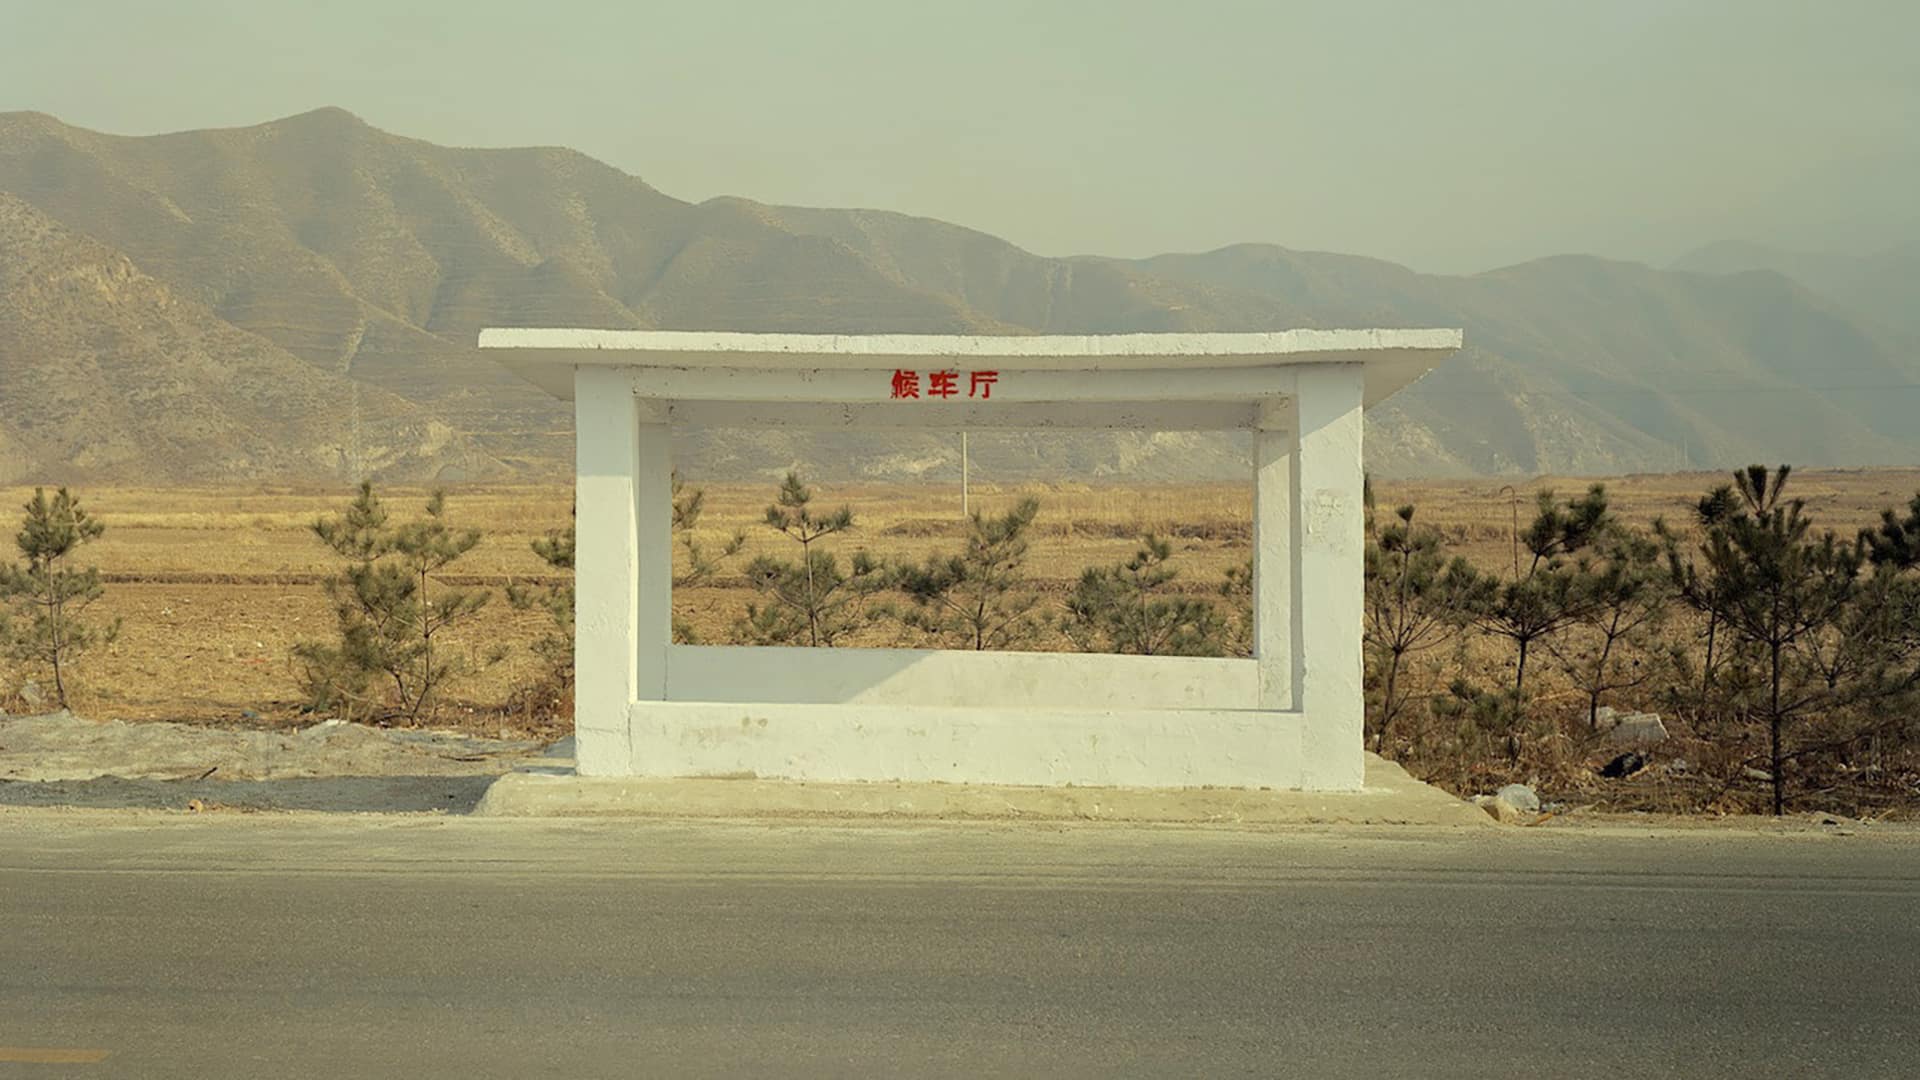 Lianzhou Foto Festival 2019: Muge takes us behind the walls